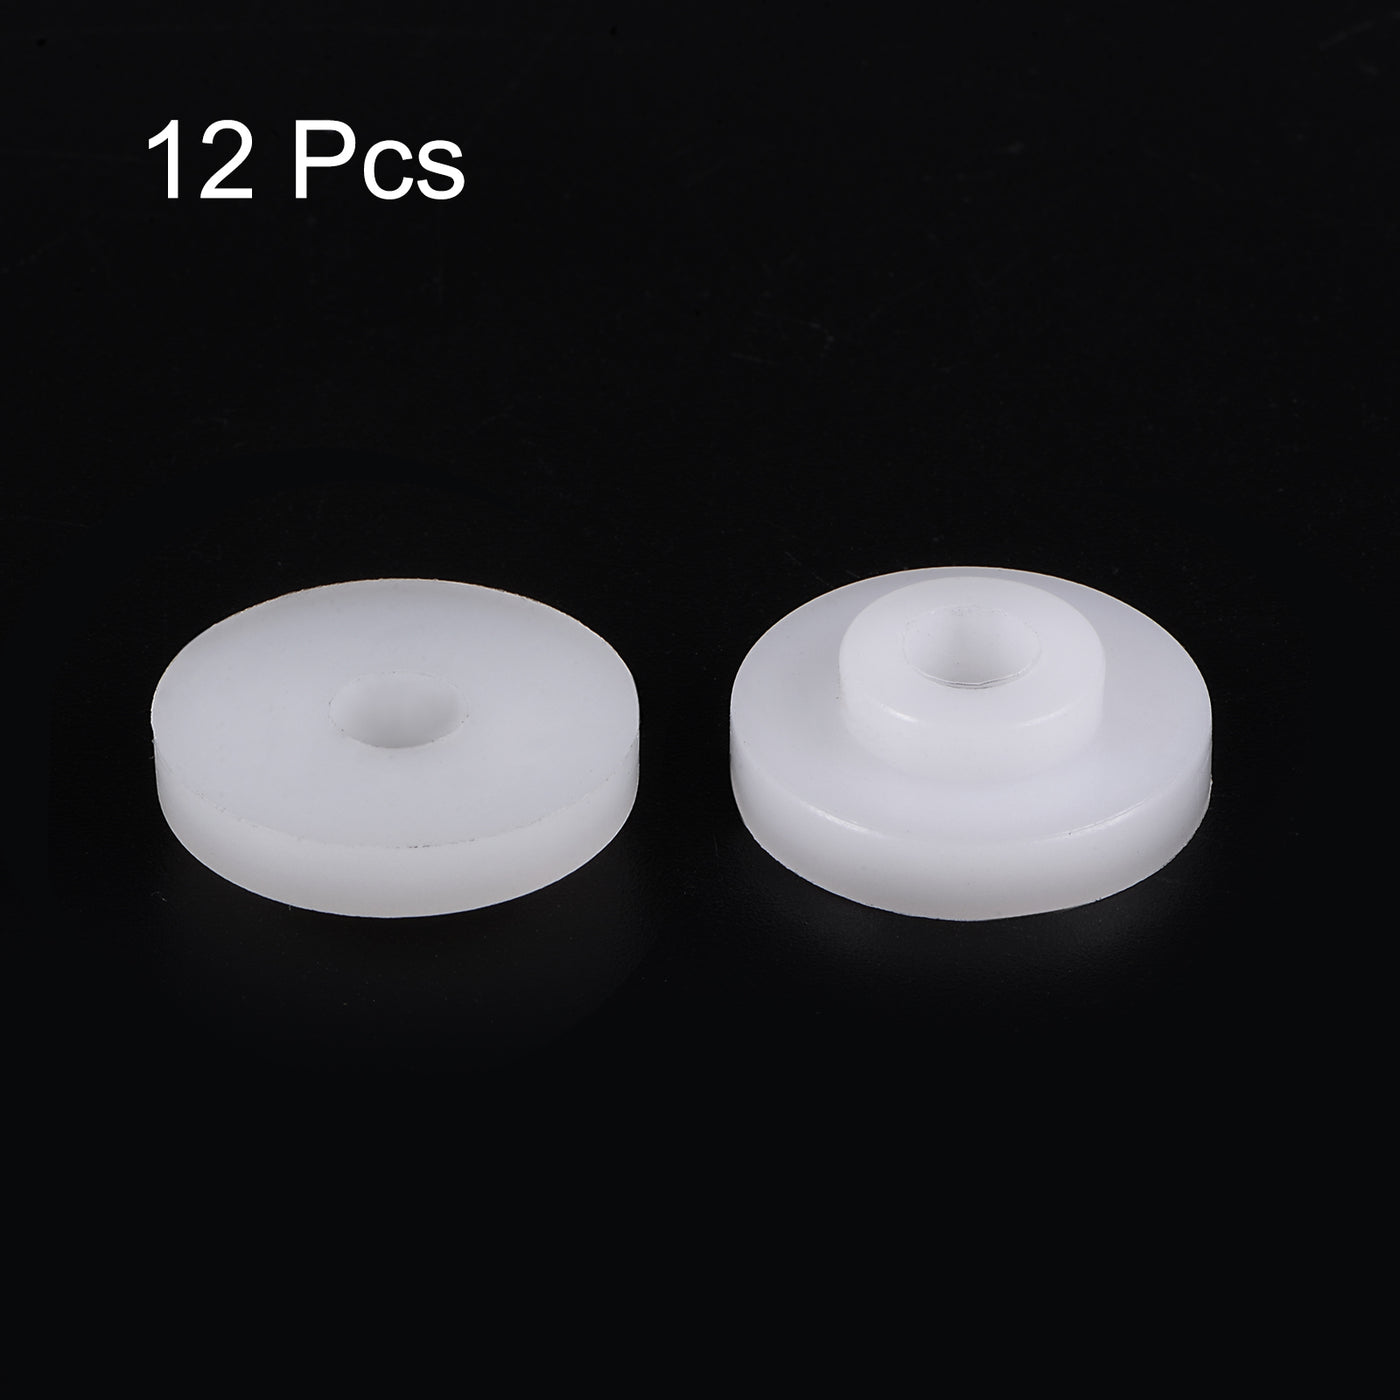 uxcell Uxcell 12pcs Flanged Sleeve Bearings 6.3mm ID 12mm OD 7mm Length Nylon Bushings, White